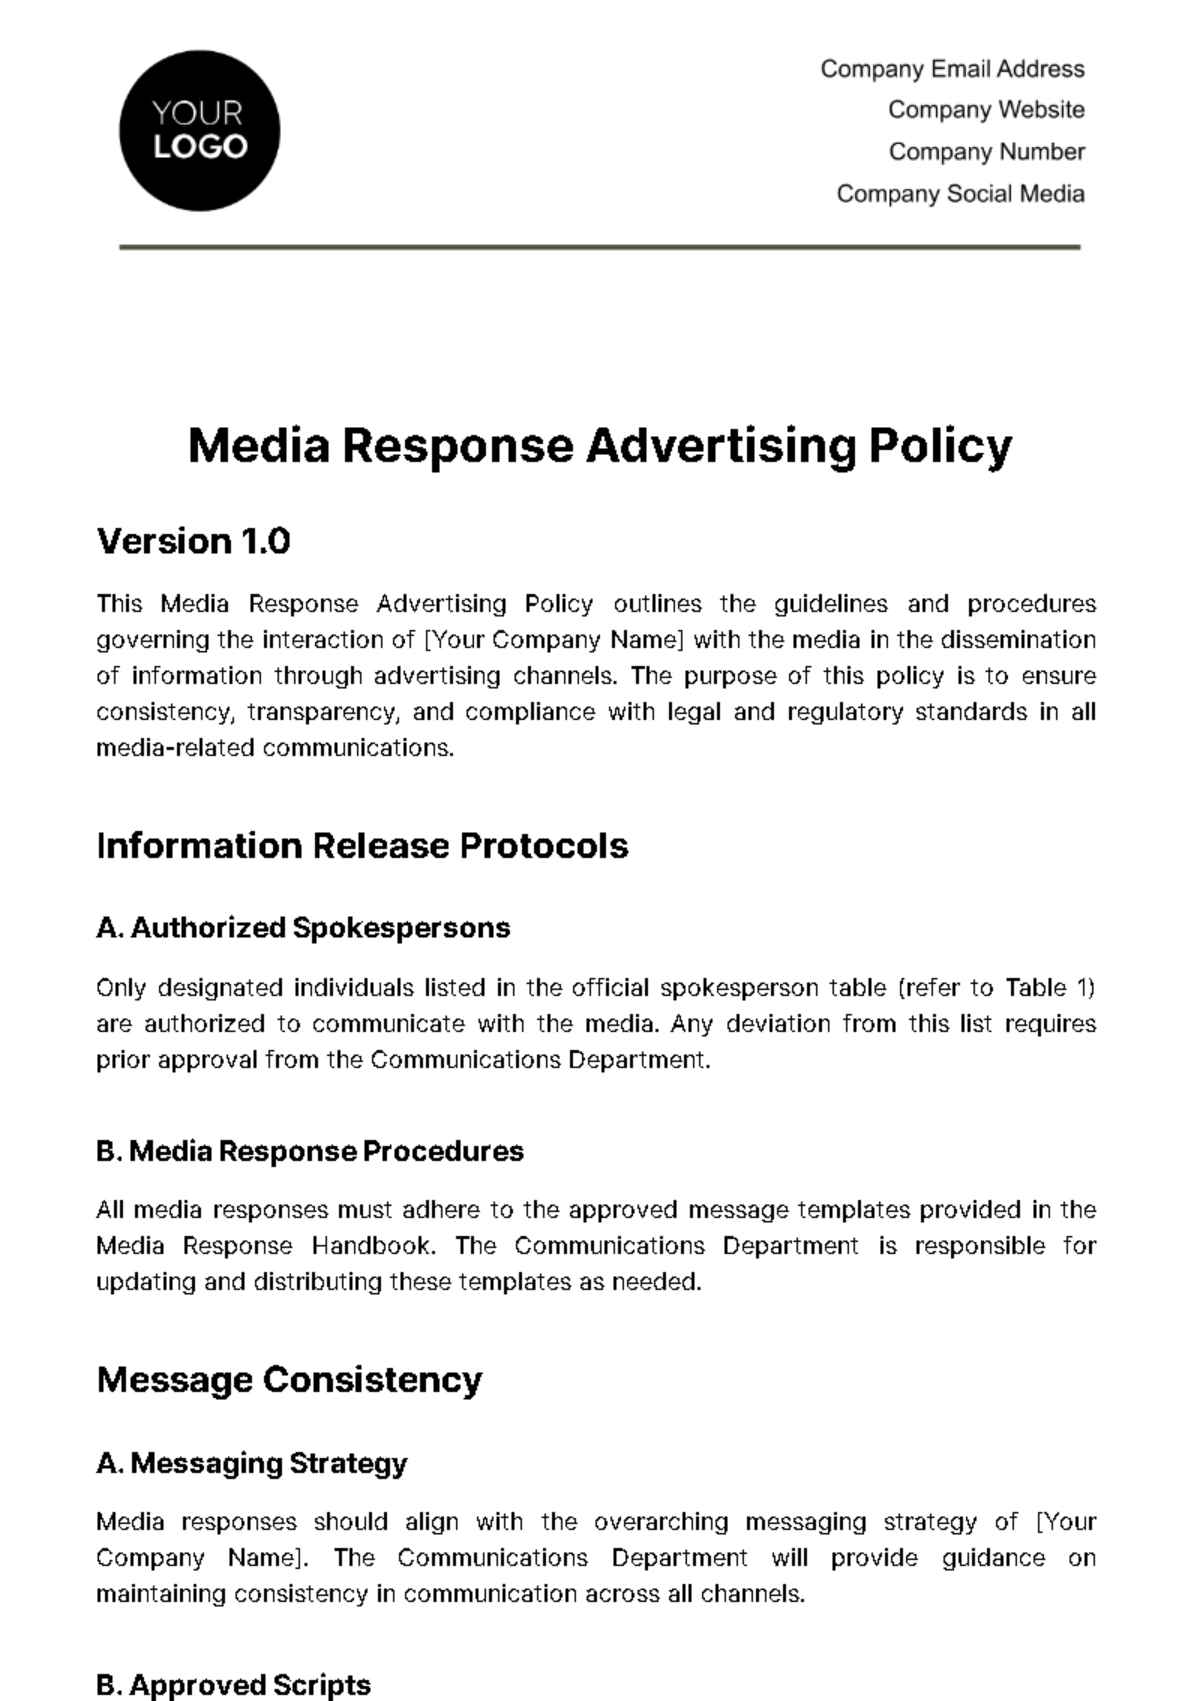 Media Response Advertising Policy Template